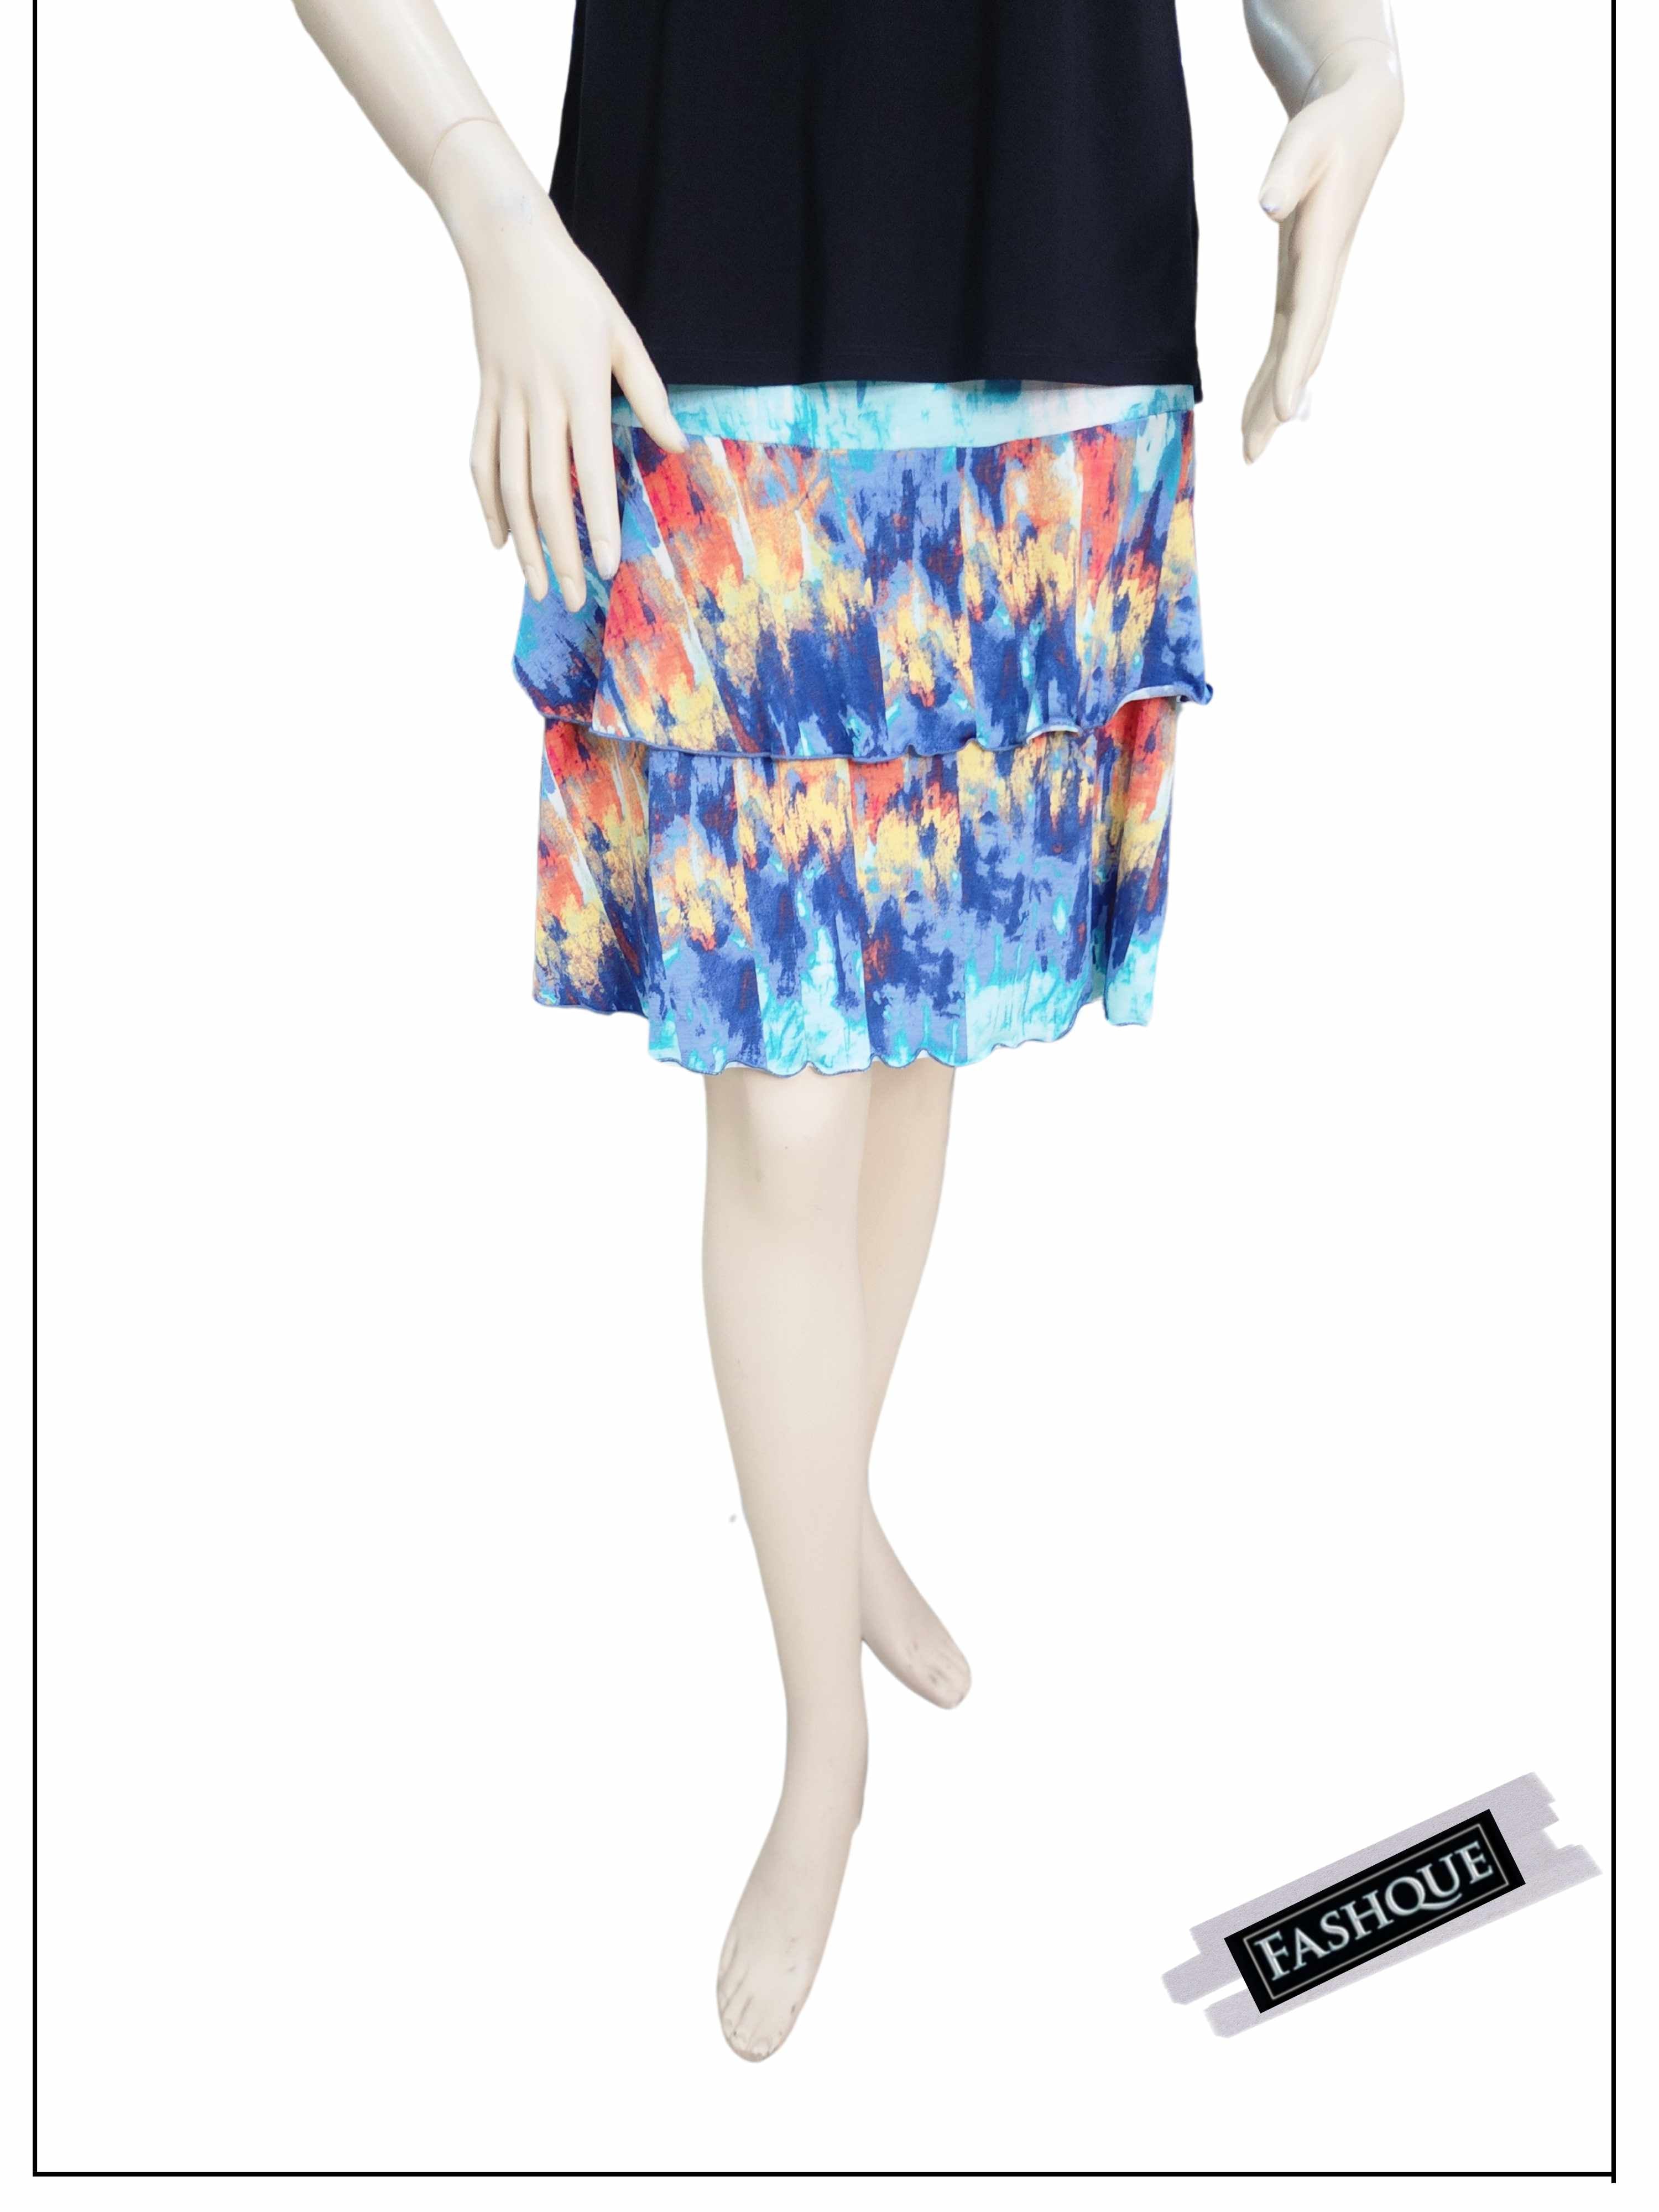 3 Tier PRINTED SKORT with the Ruffle in the center - SH001 SALE